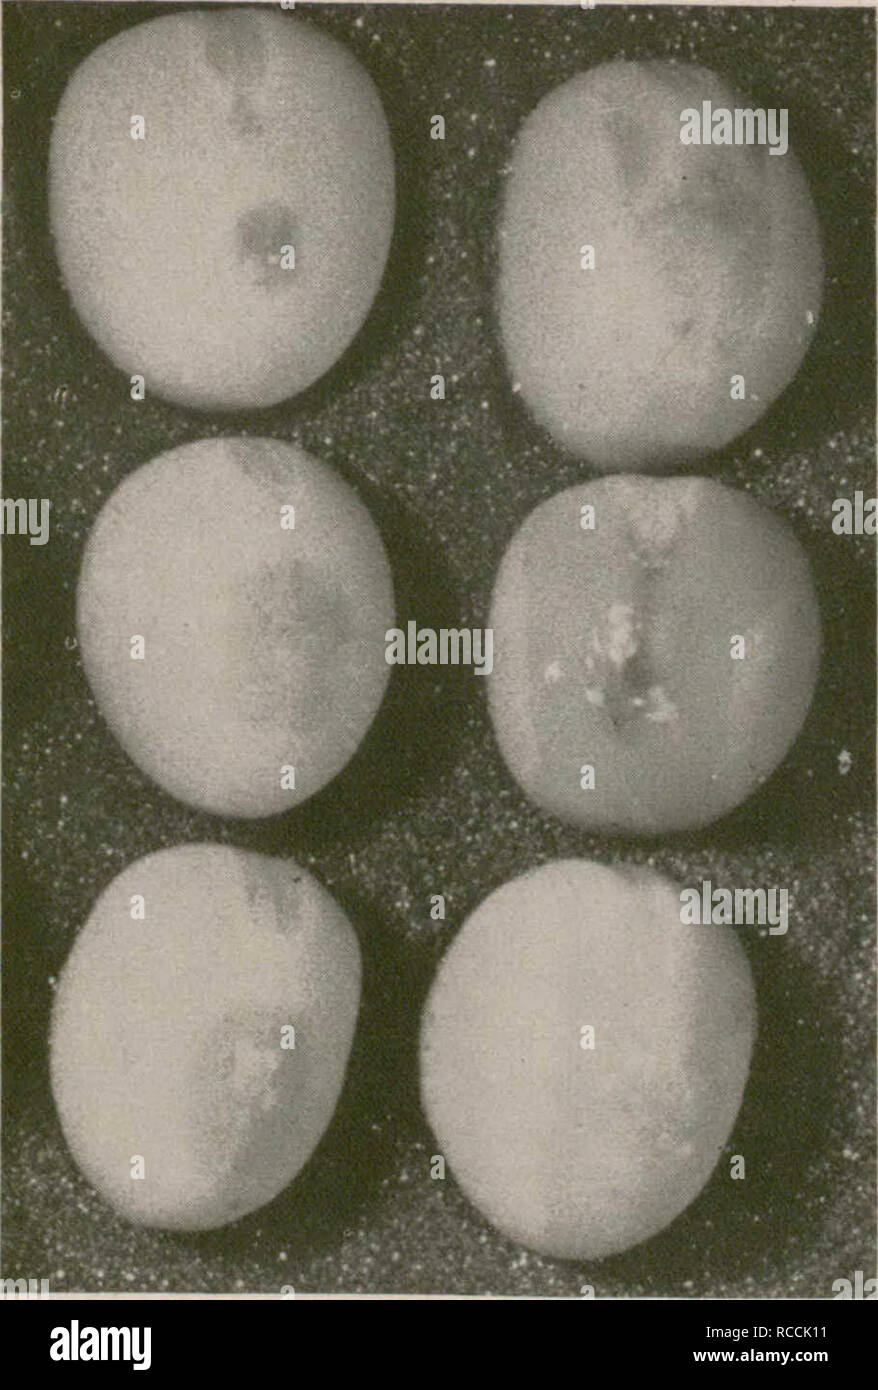 . Diseases of field crops in the Prairie Provinces. Plants; Cultures de plein champ; Cultures de plein champ; Plantes. DISEASES OF FIELD CROPS. Figure 26.—Pea seeds affected by bacterial blight. Note watersoaked areas. Ascochyta Blight Ascochyta pisi, A. pinodella, and Mycosphaerella pinocles Ascochyta blight is caused by one or more of the fungi named above. This disease is widespread and, occasionally, has been a serious threat to the seed and green-pea industries in areas of abundant moisture. Appearance—Somewhat similar though distinguishable, symptoms are caused by the three parasites. Th Stock Photo